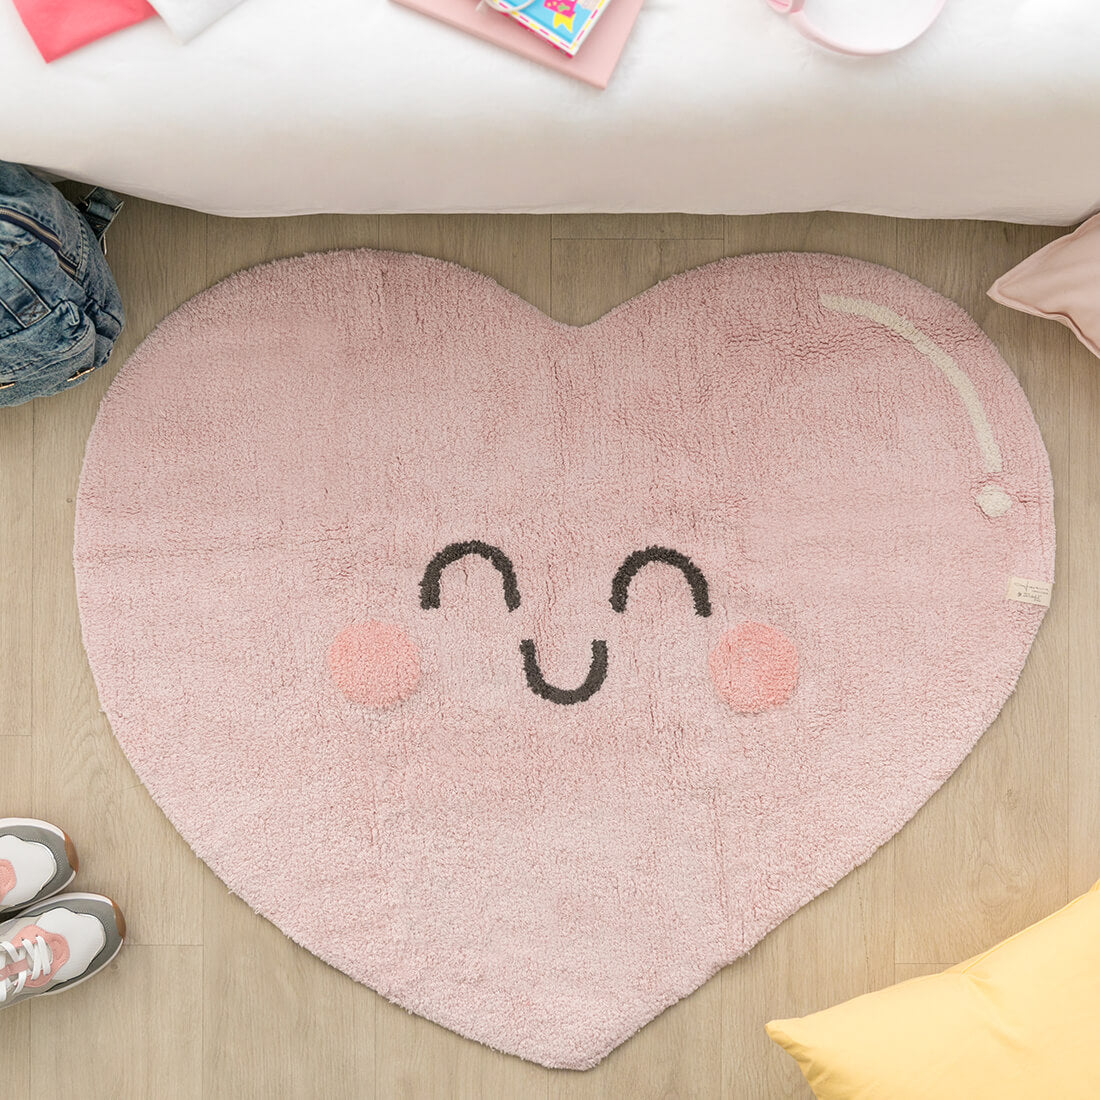  cotton tufted heart shaped rug